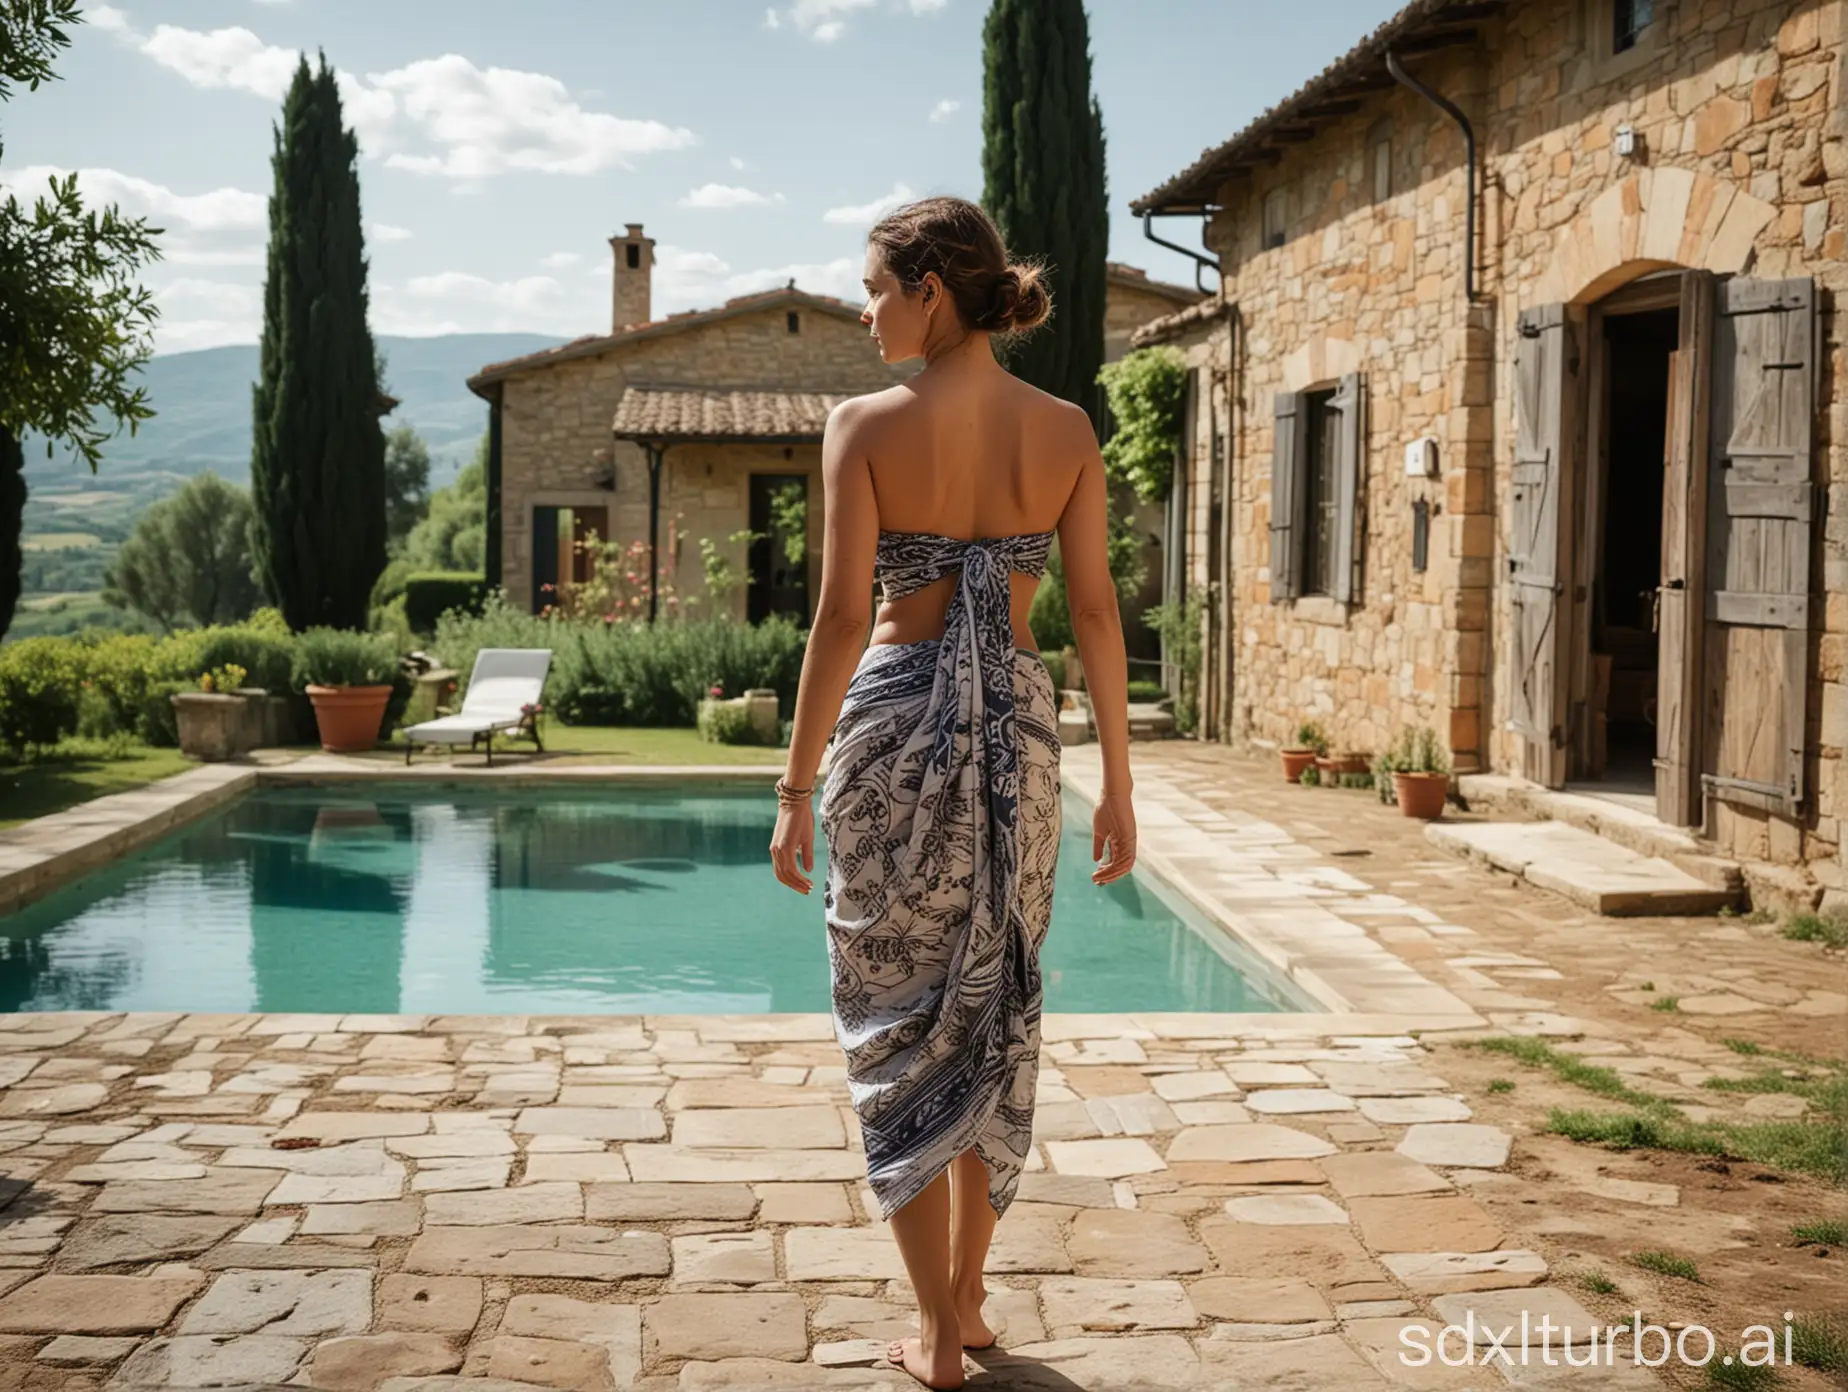 Woman-in-Sarong-by-the-Tuscany-Poolside